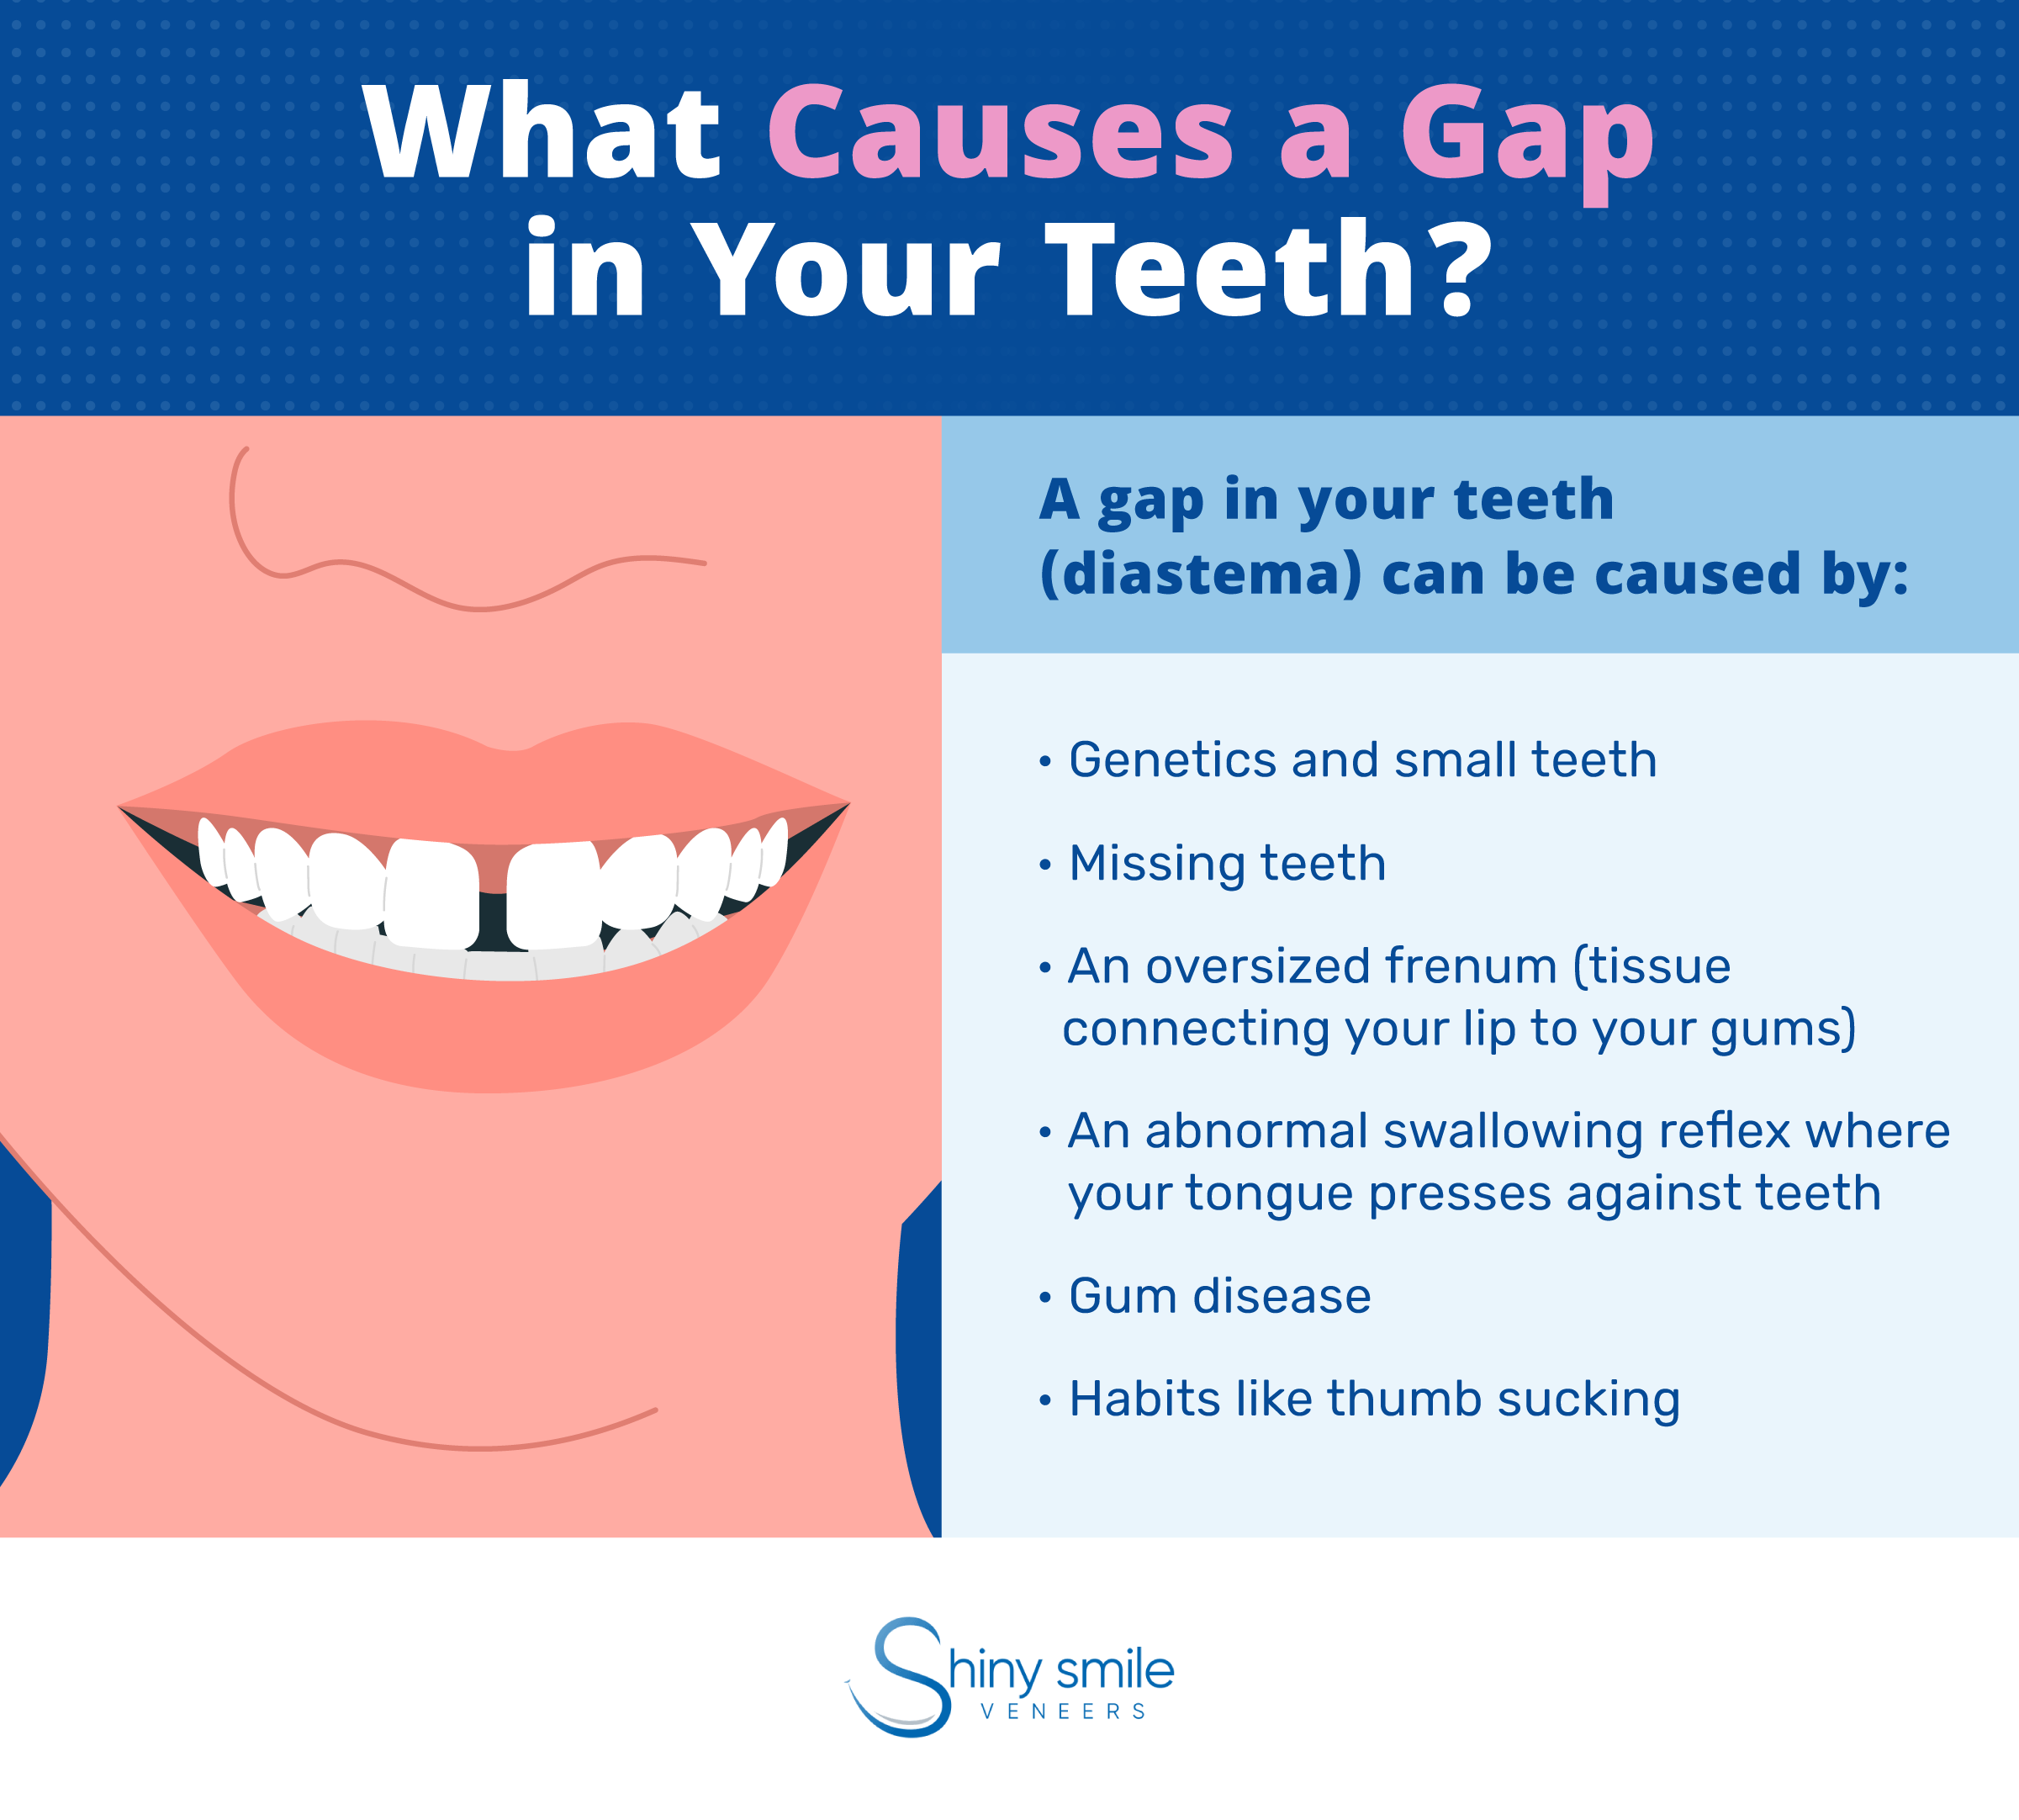 What causes a gap in your teeth